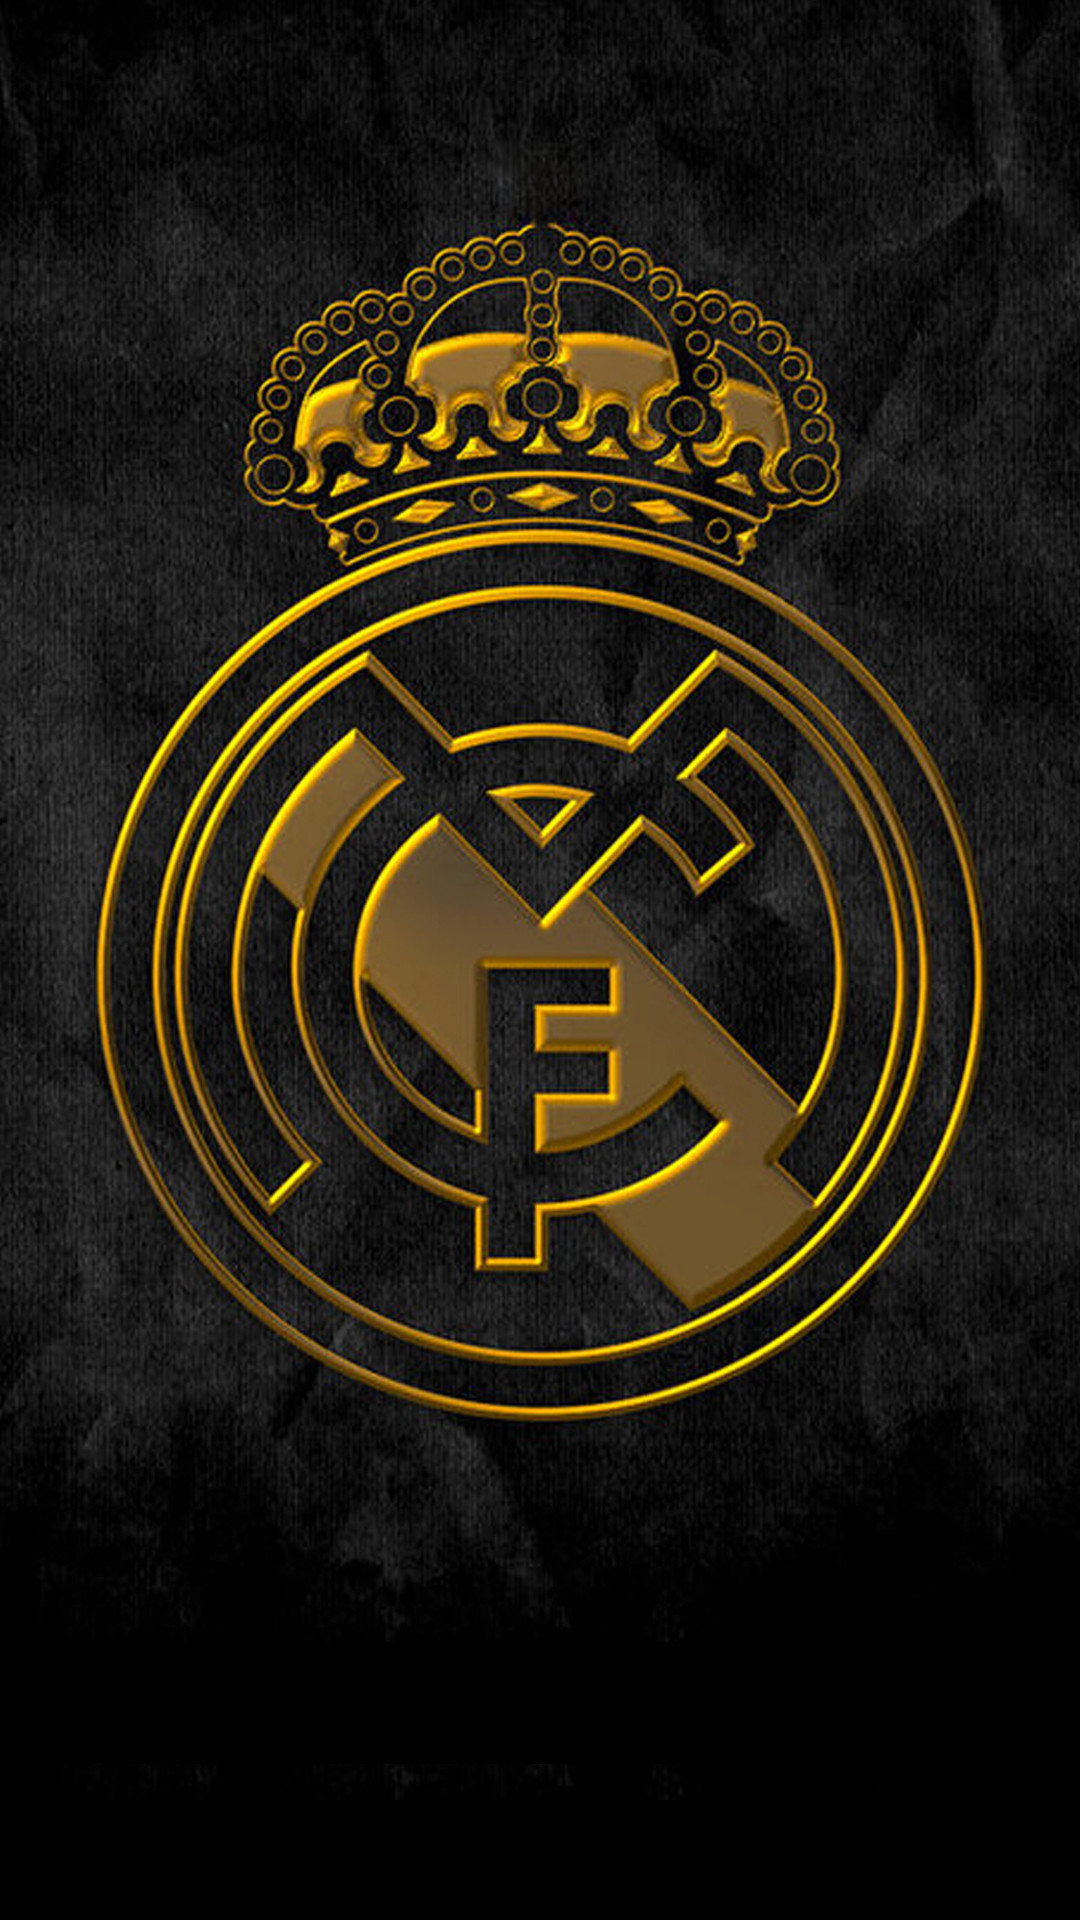 See? 32+ List About Real Madrid Wallpaper Handy People Missed to Let